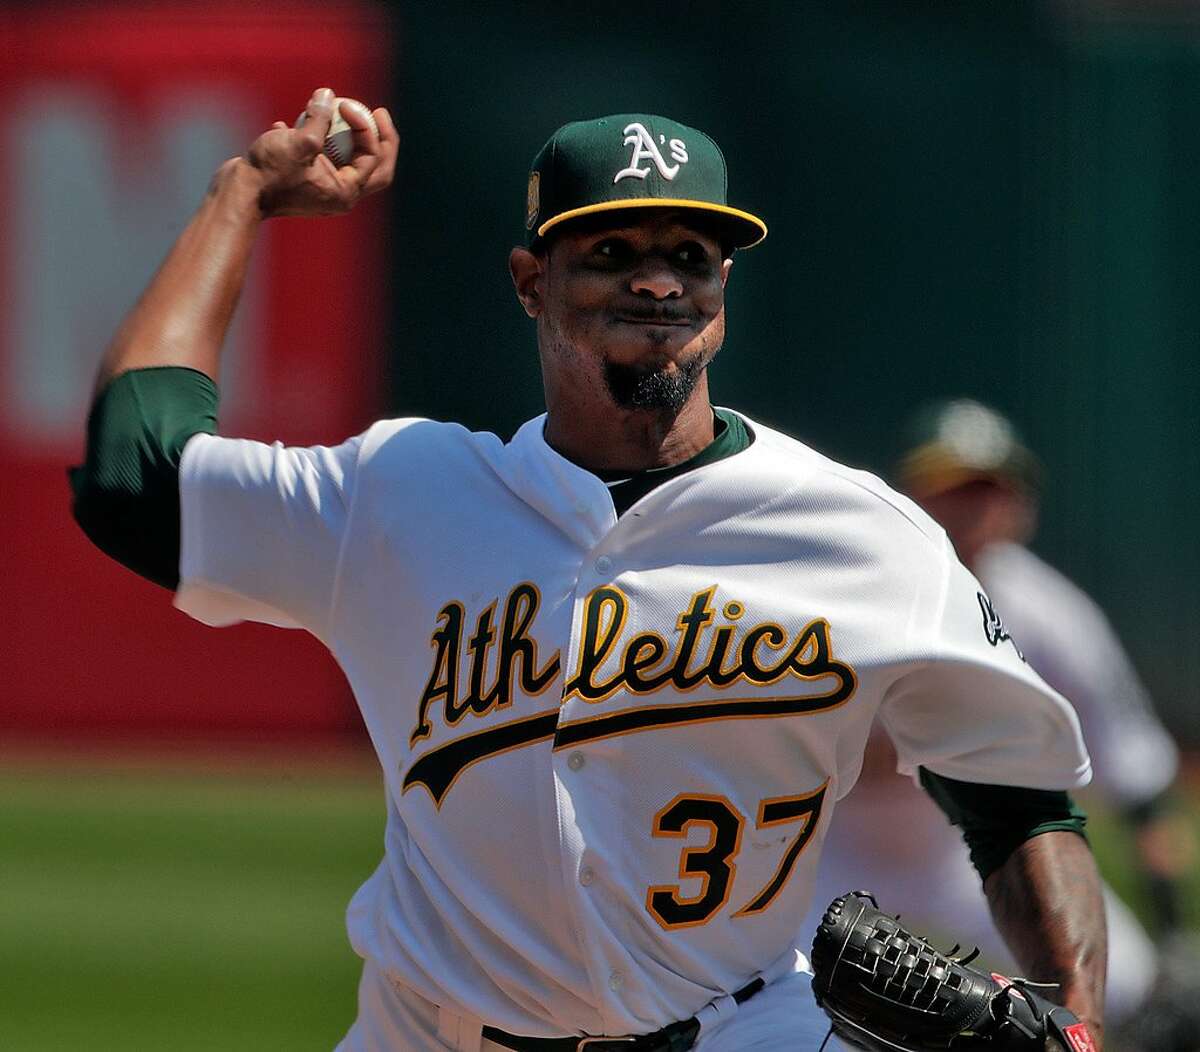 A's happy Edwin Jackson is back: 'This guy meant so much to us